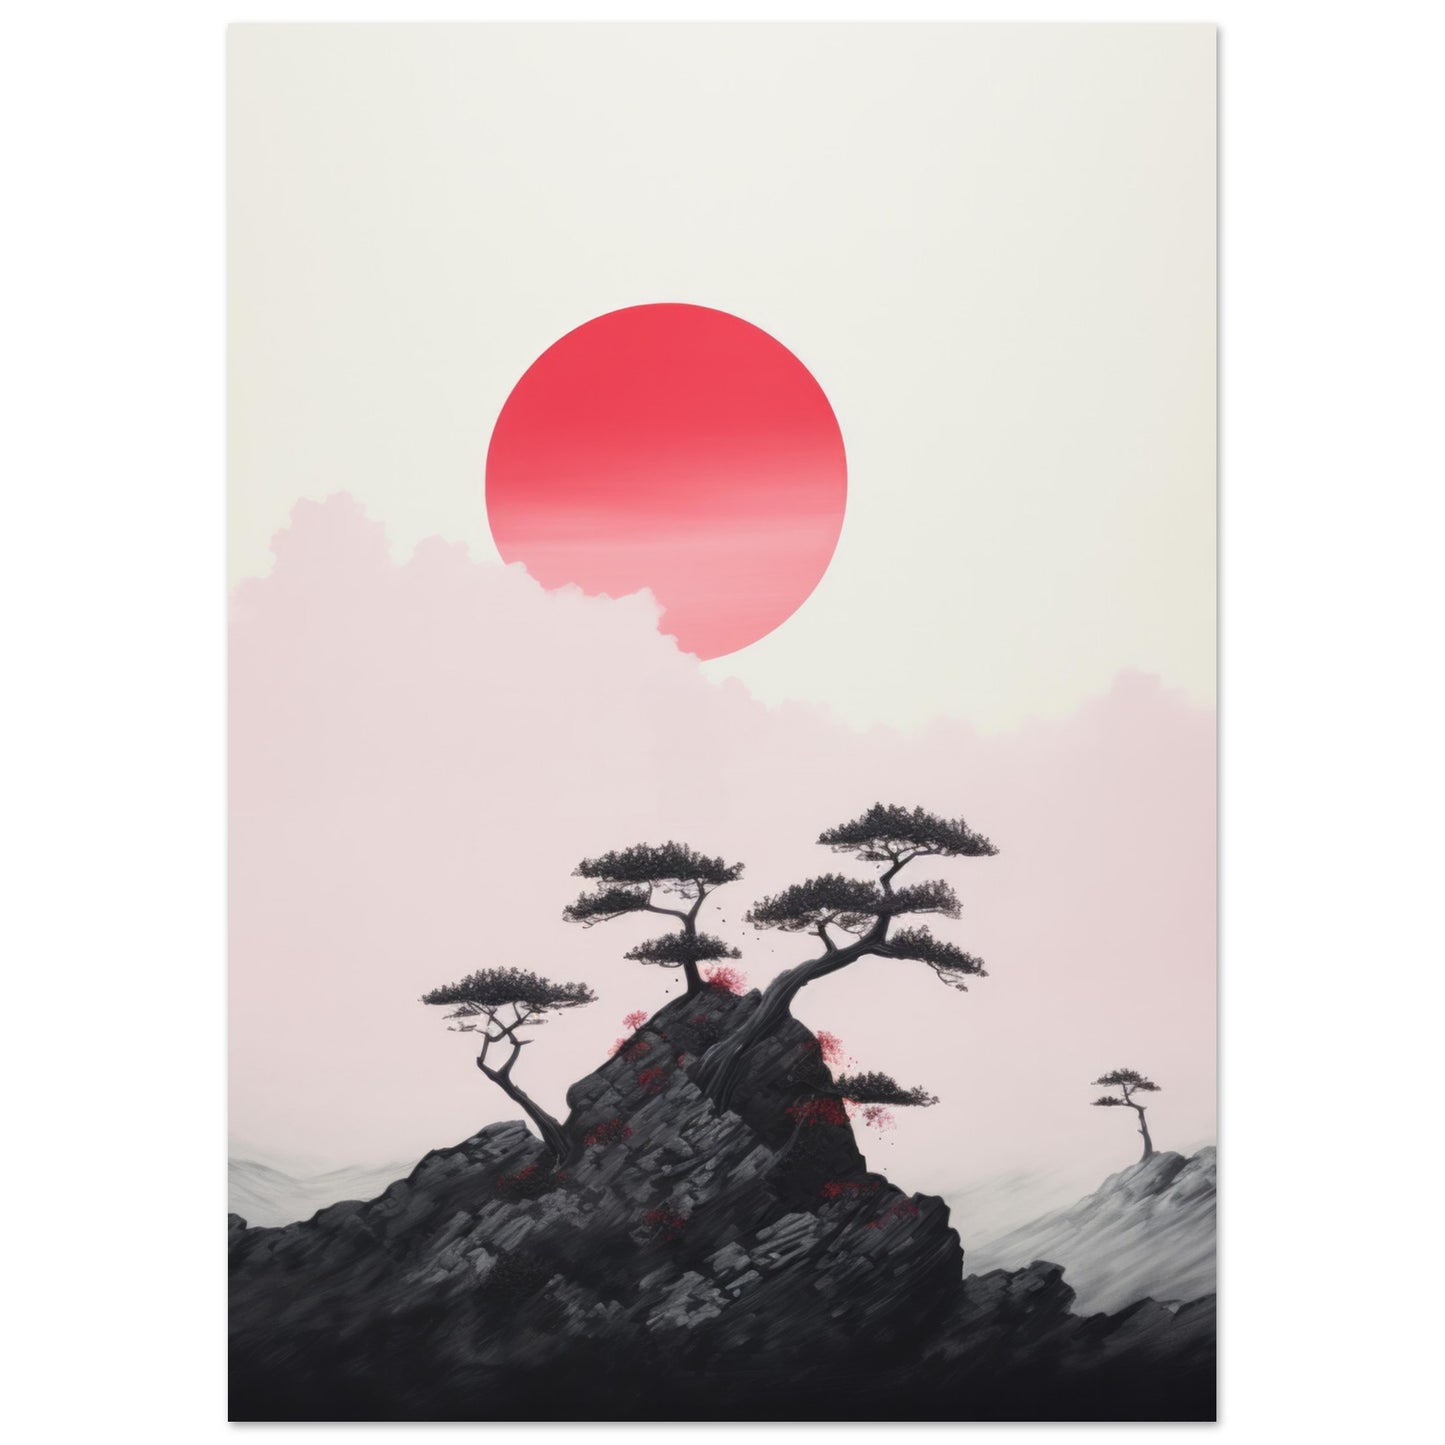 A minimalist contemporary art print titled "Cevenya", showcasing a bold red sun setting behind a rocky landscape with elegantly poised trees. The gentle pastel clouds contrast with the intense heat implied by the sun, creating a harmonious balance in nature's depiction.